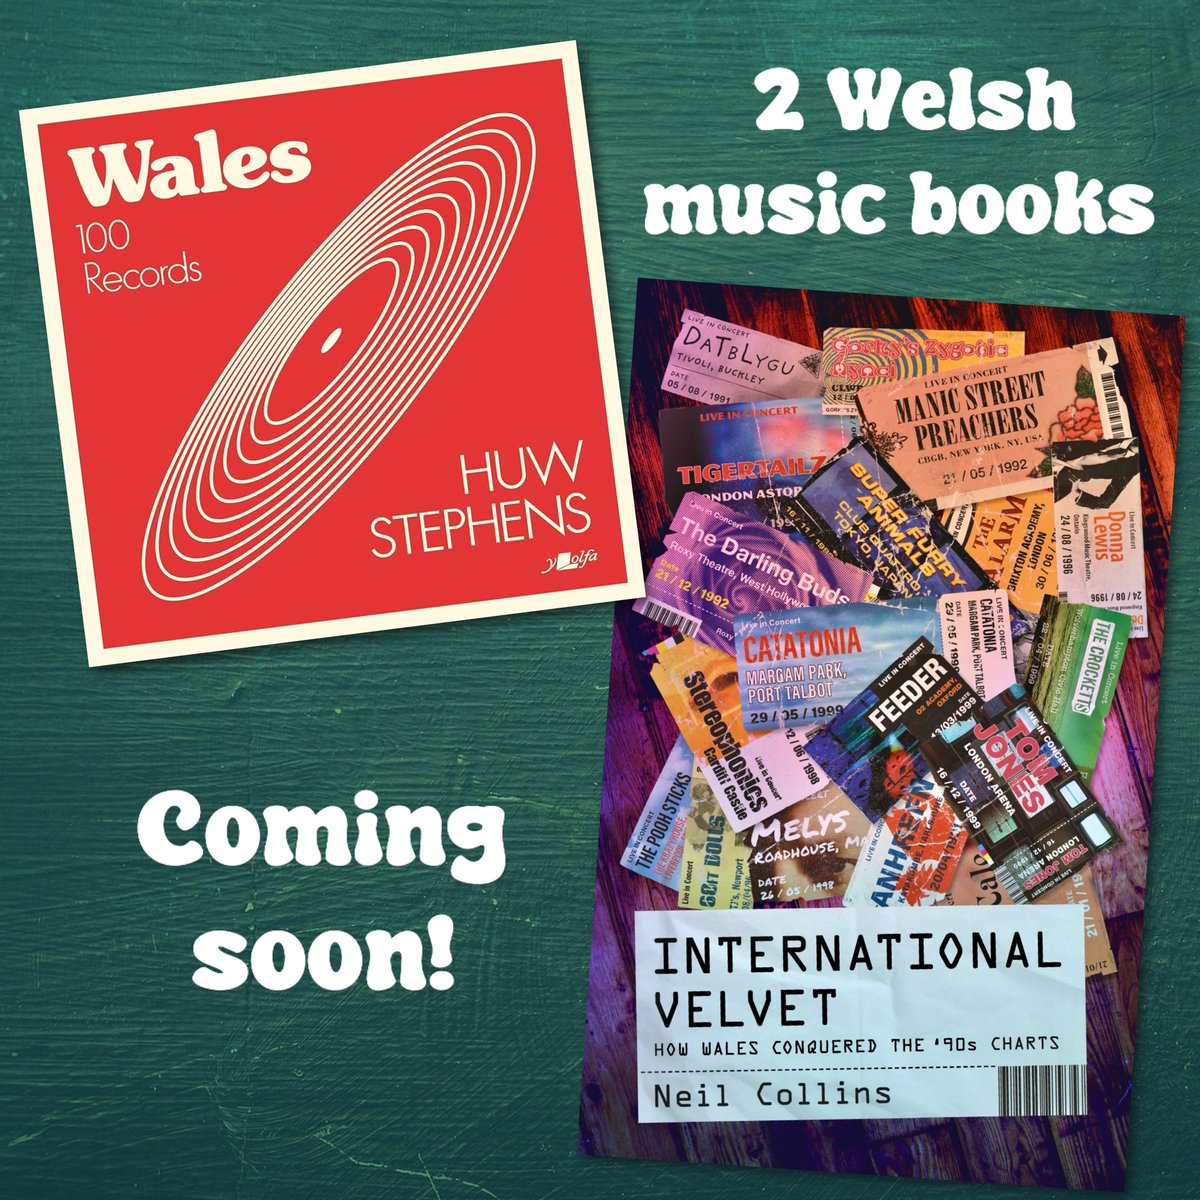 As it’s #WorldBookDay, here are two great books on Welsh music coming soon! @huwstephens - Wales 100 Records @NeilCollins86 - International Velvet: How Wales Conquered the 90s Charts Pre-order: bit.ly/3PaYYkb / bit.ly/3vo4aKz #worldbookday2024